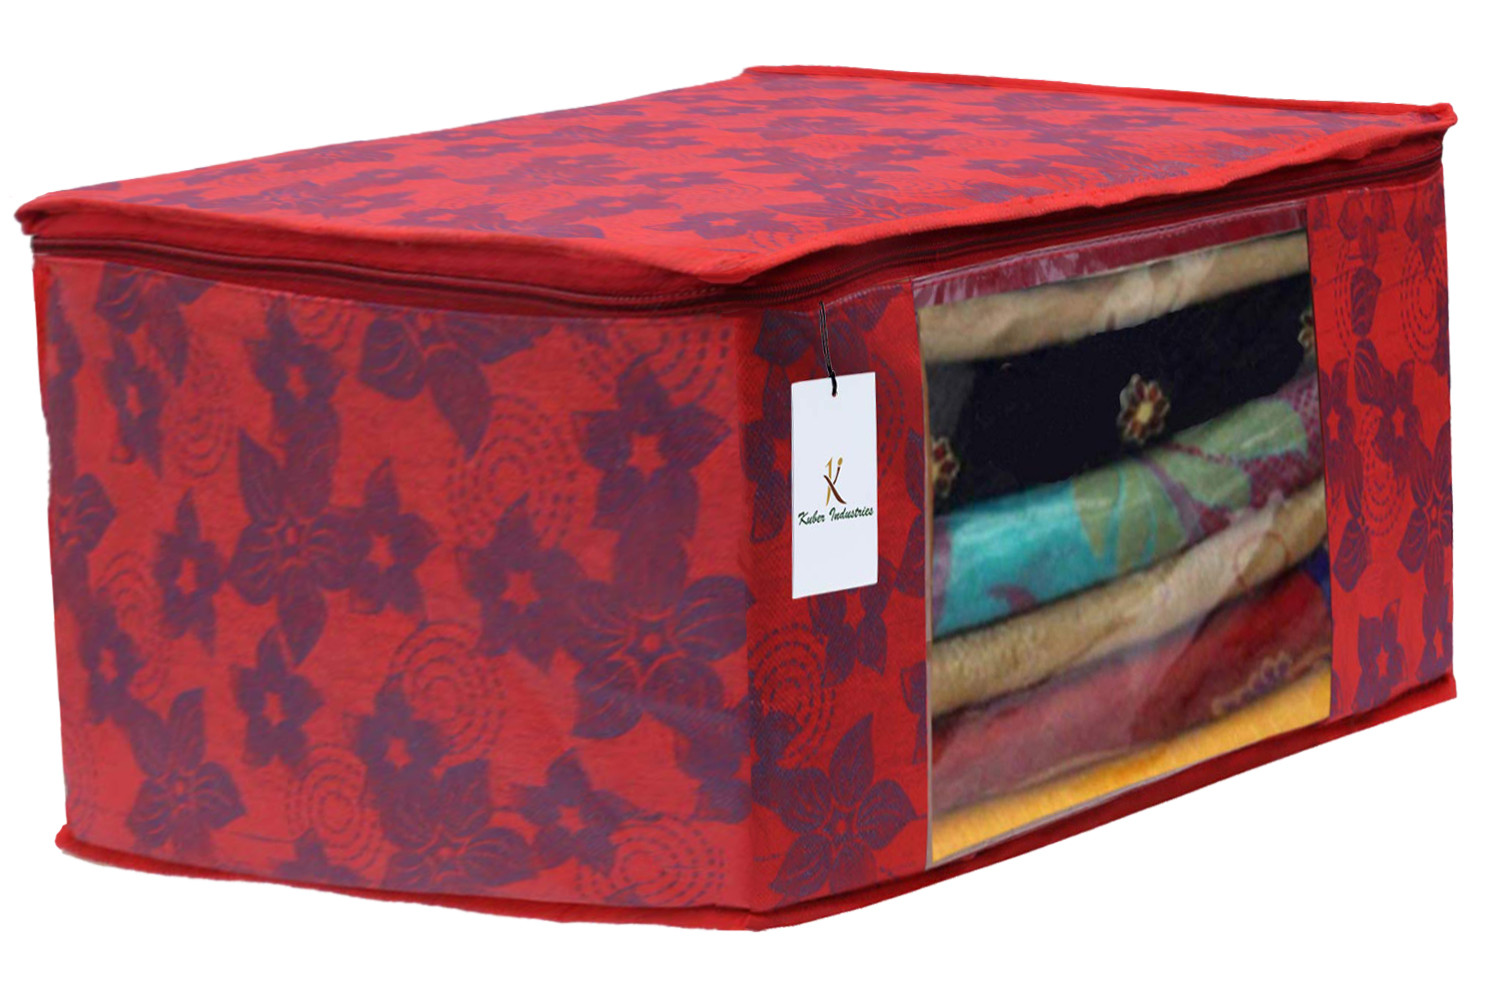 Kuber Industries Metalic Printed Non Woven Saree Cover And Underbed Storage Bag, Storage Organiser, Blanket Cover, Brown & Red  -CTKTC42379